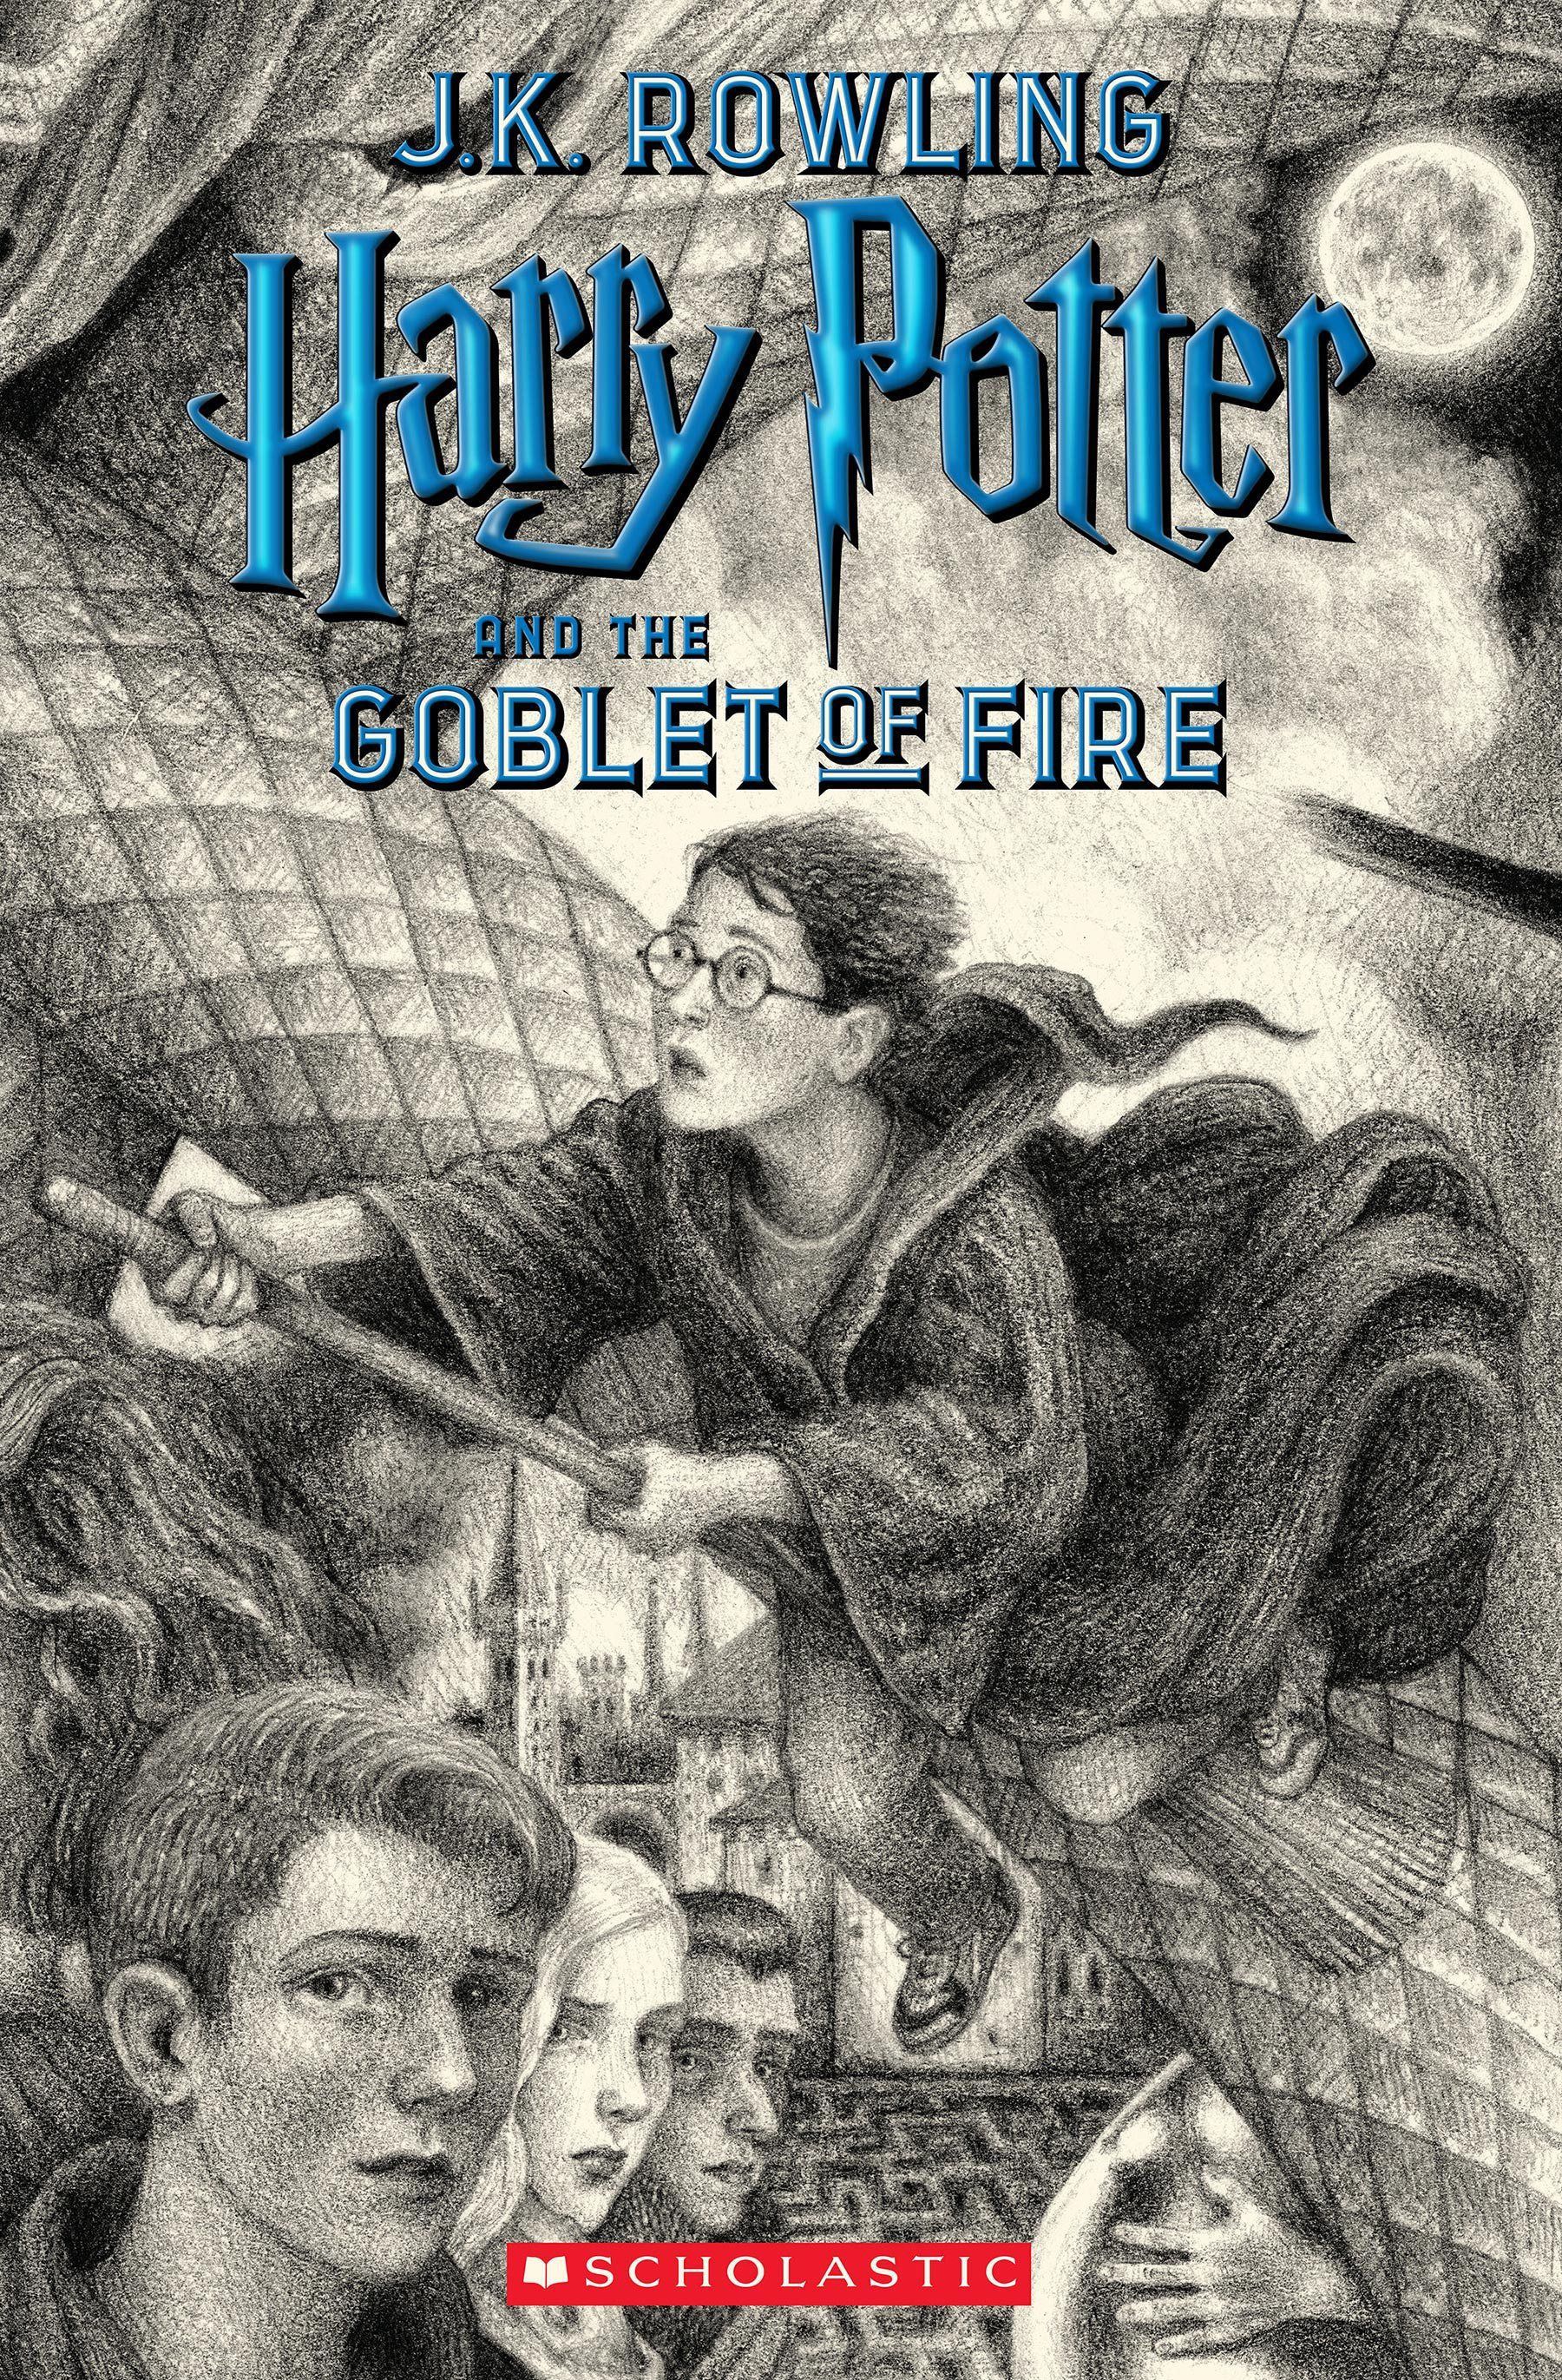 Re)Review: Harry Potter and the Goblet of Fire